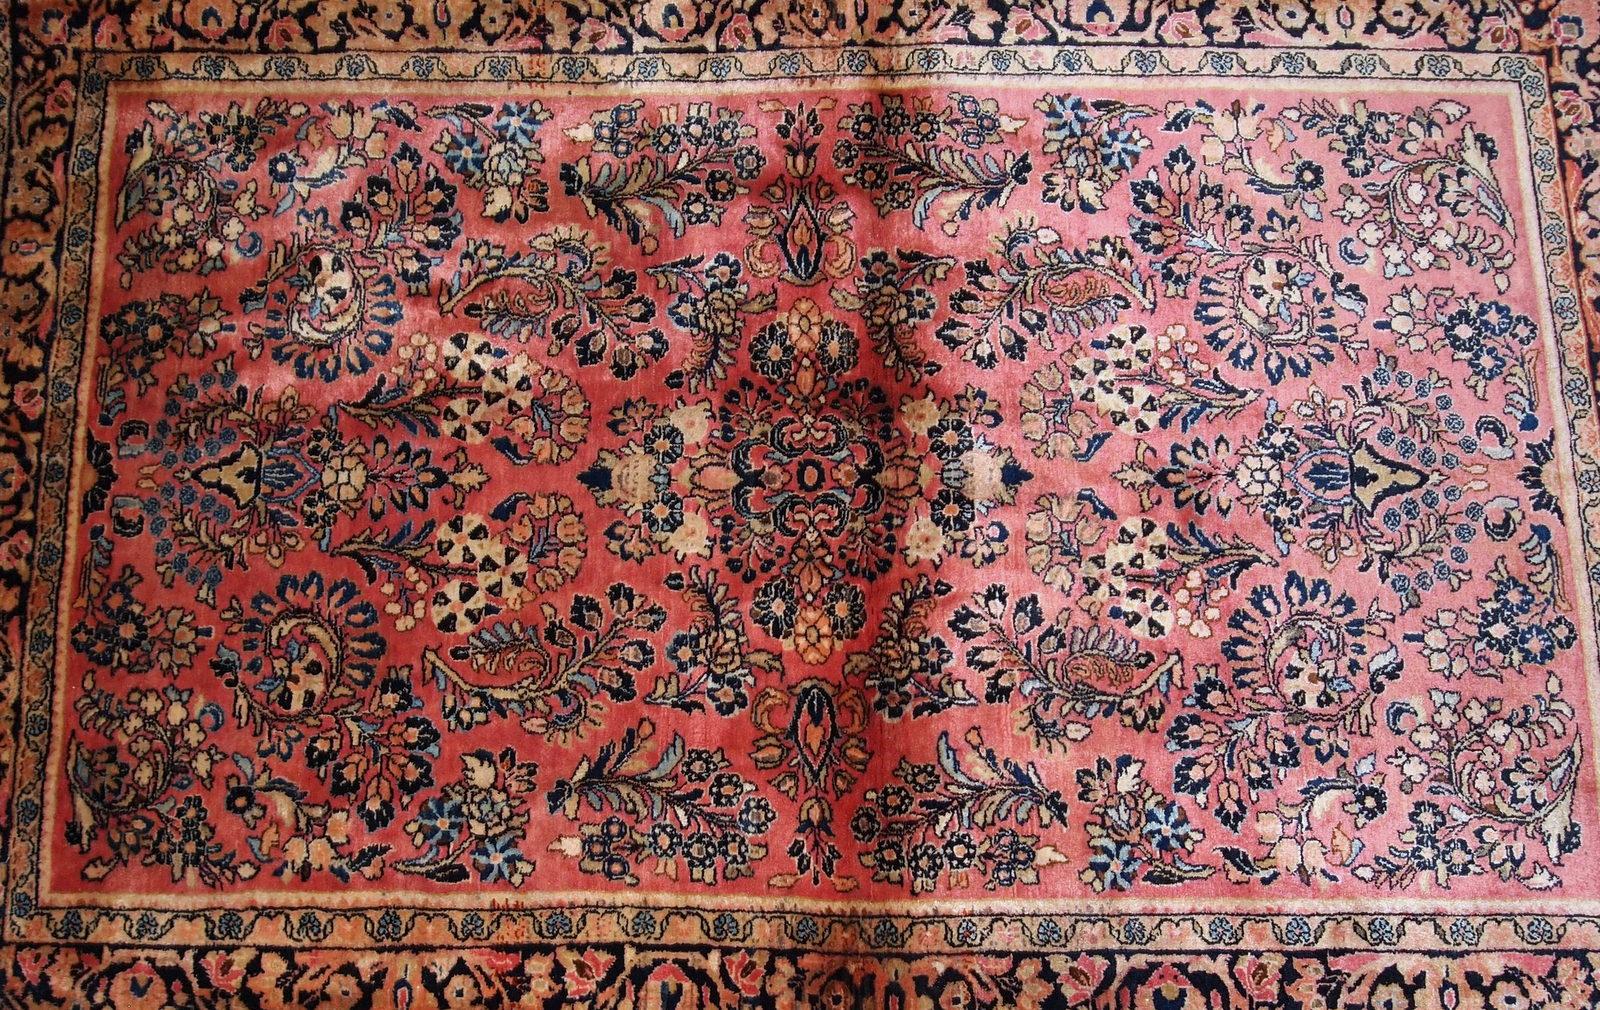 Handmade antique Sarouk style rug in original good condition. The rug is from the beginning of 20th century made in pink shade. 

- Condition: Original good,

- circa 1920s,

- Size: 3.3' x 5.2' (100cm x 158cm),

- Material: Wool,

-